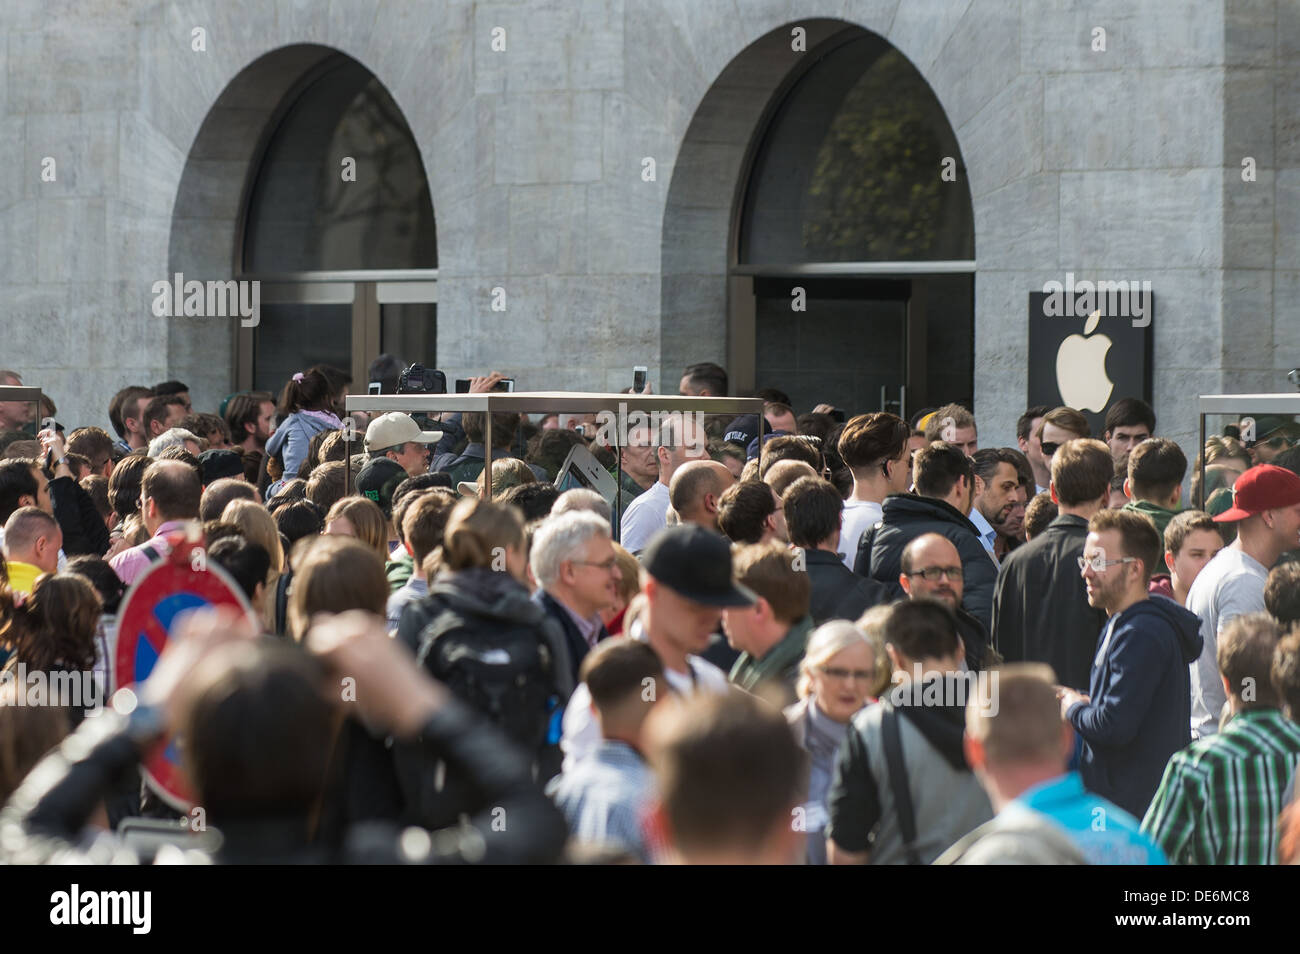 Berlin, Germany, crowds at the opening of the Apple Store on Kurfuerstendamm Stock Photo